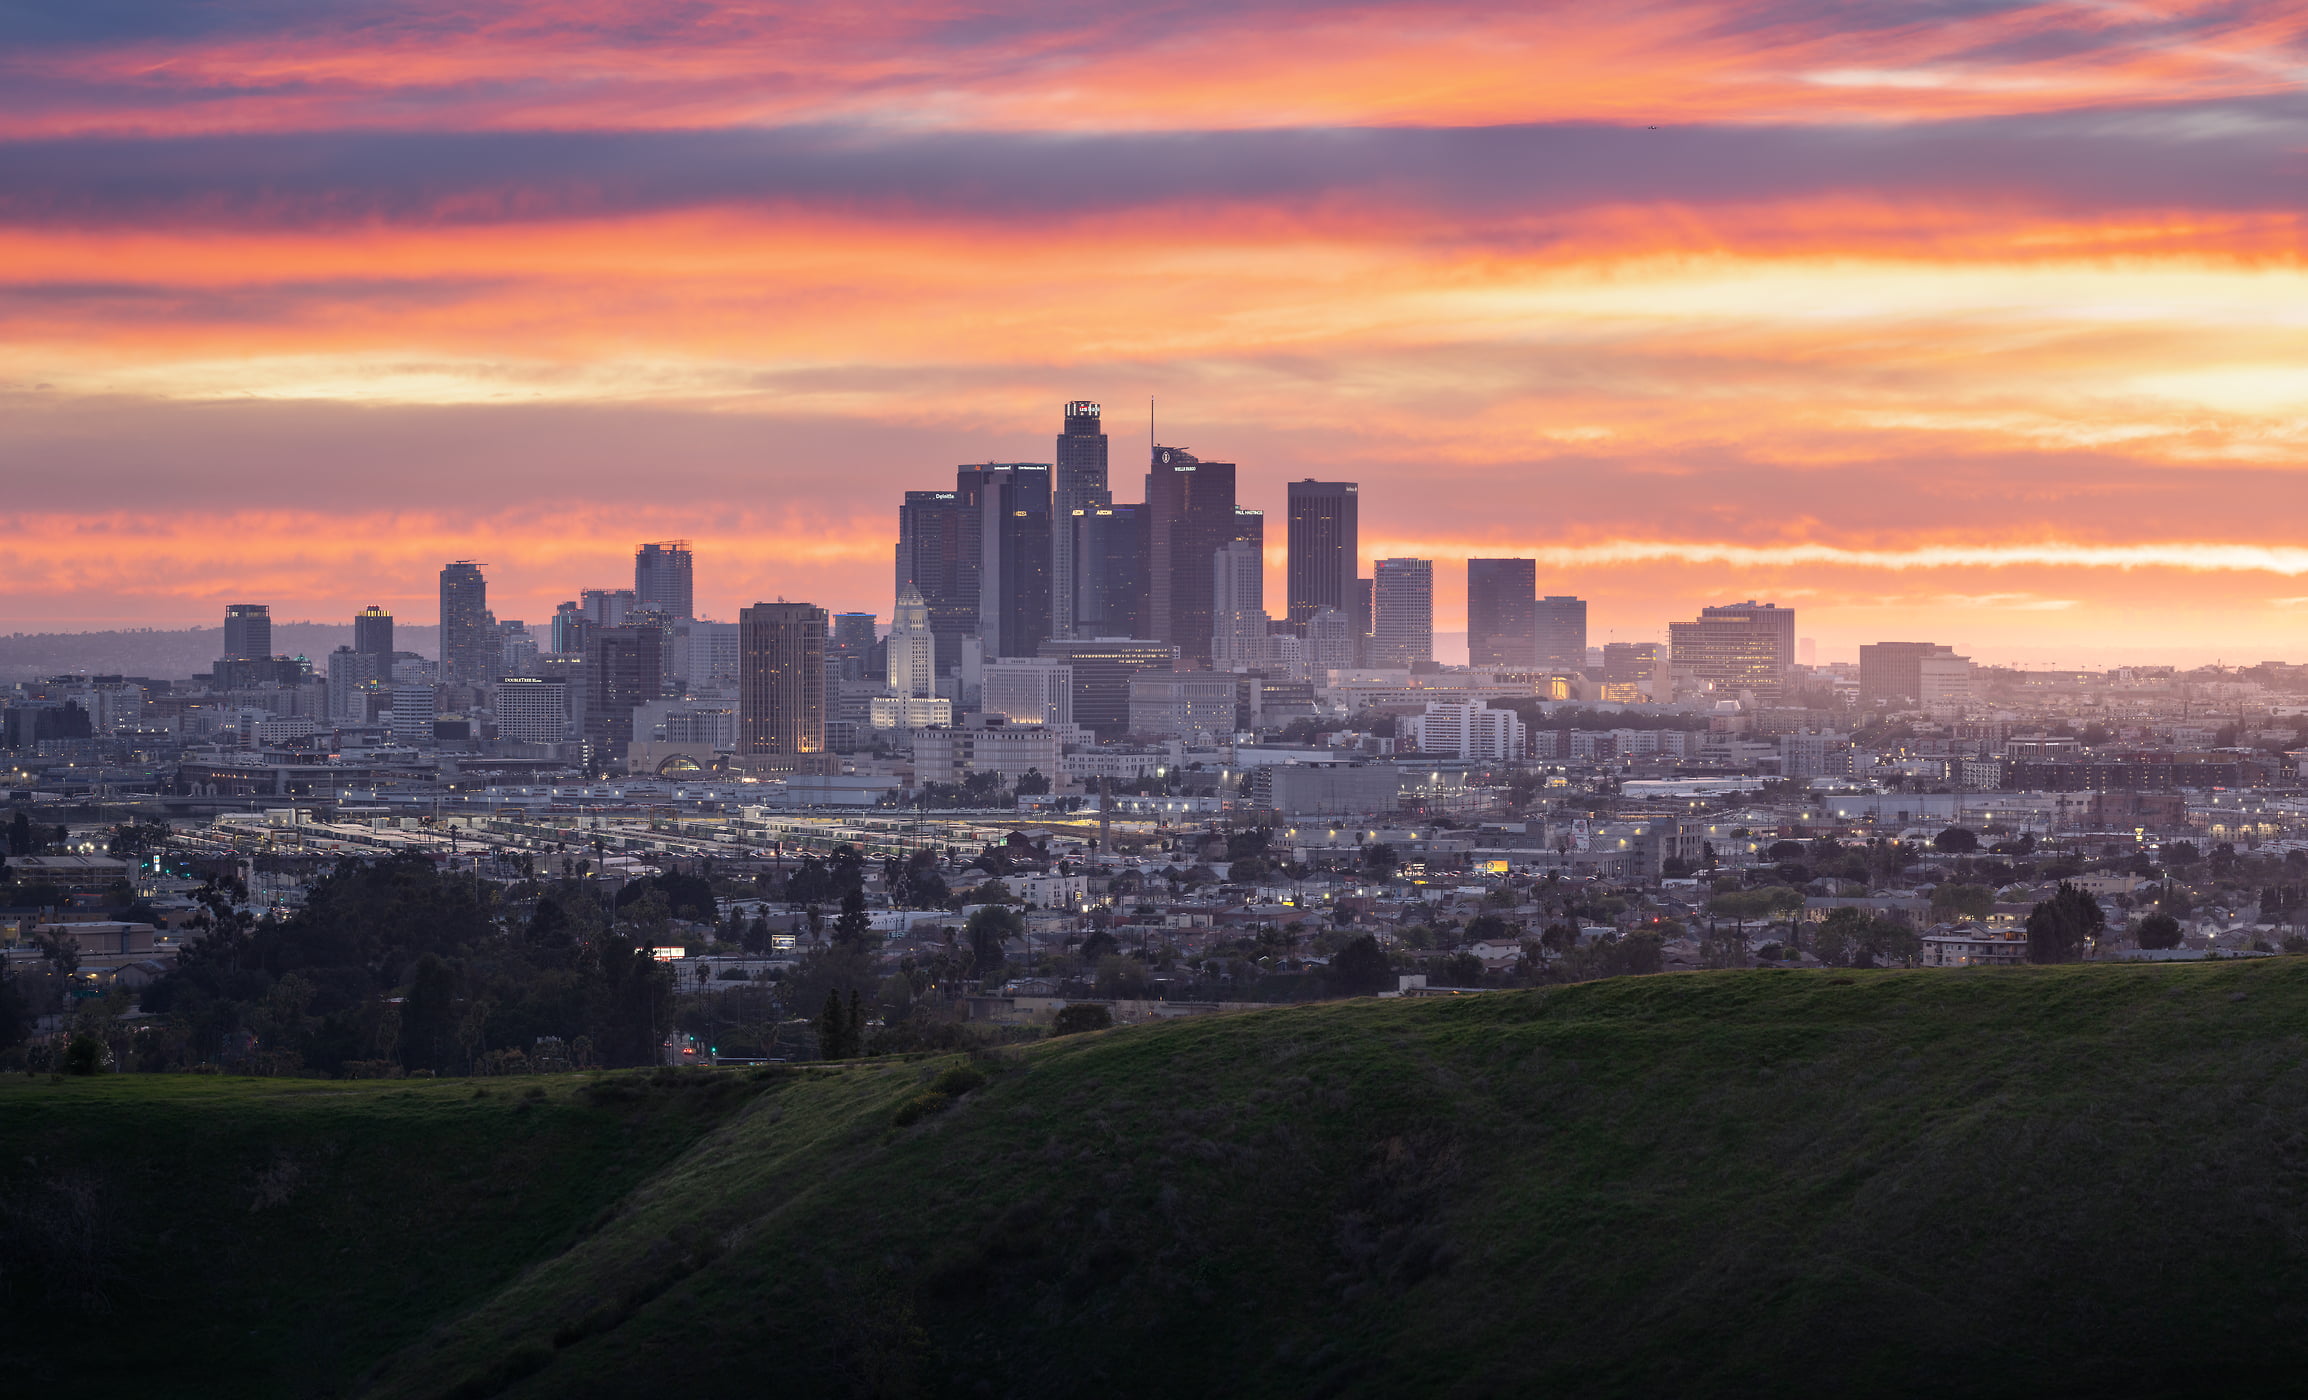 194 megapixels! A very high resolution, large-format VAST photo print of Los Angeles at sunset; skyline photograph created by Jeff Lewis in Los Angeles, California